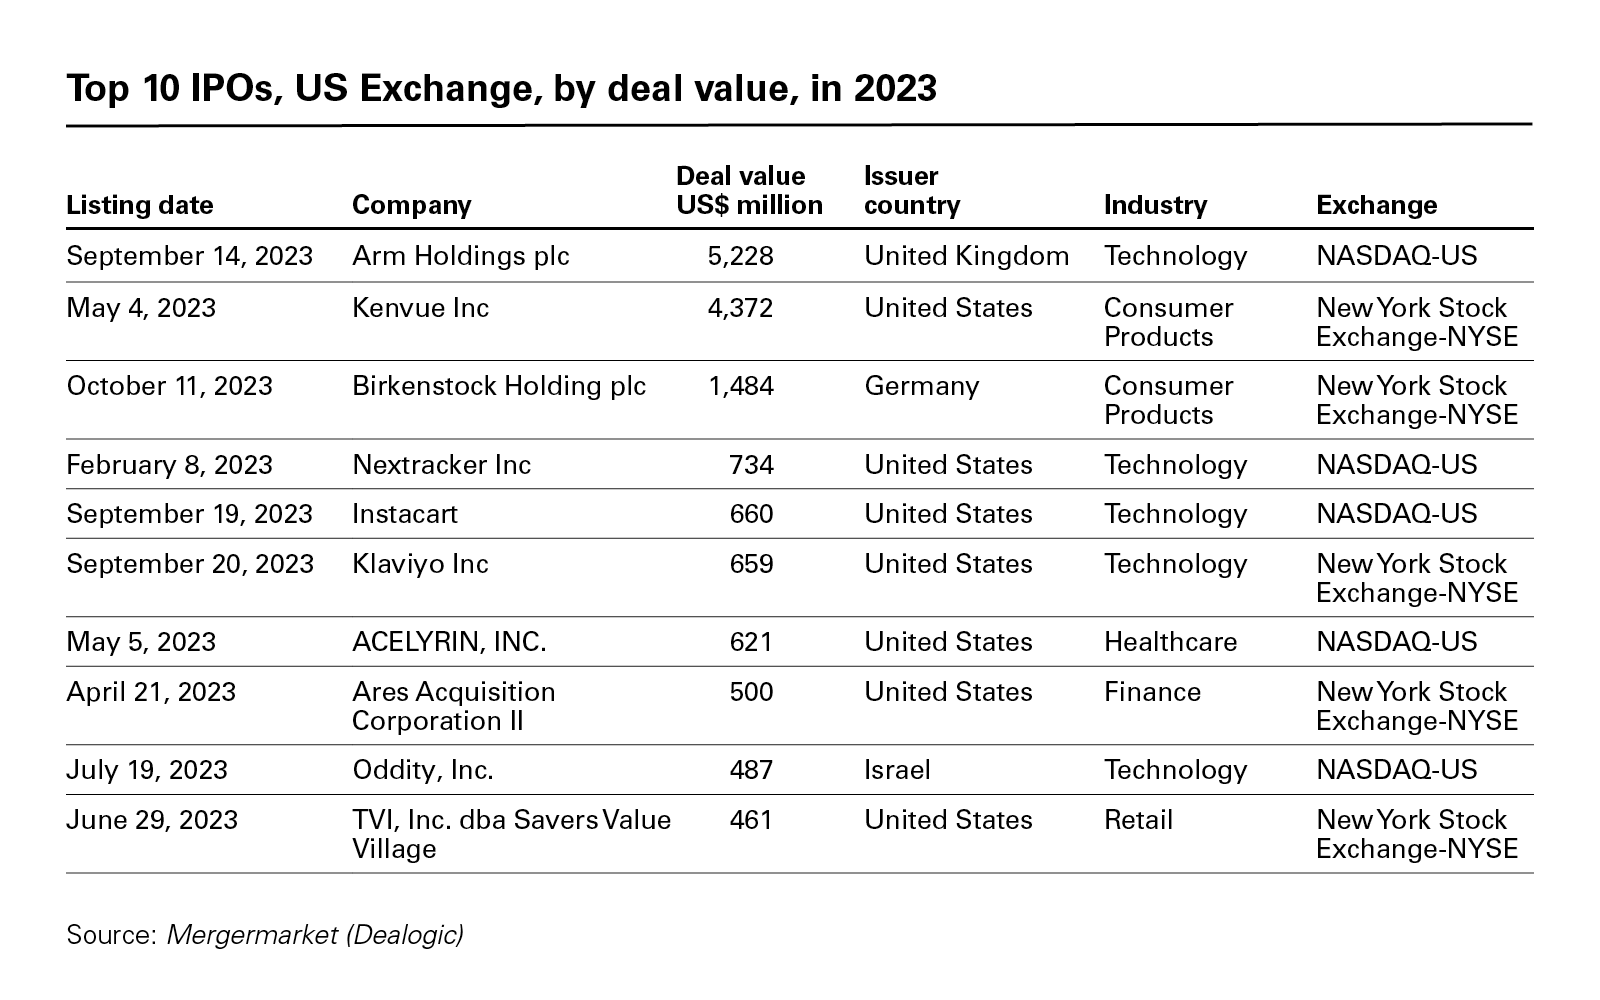 Top 10 IPOs, US Exchange, by deal value, in 2023